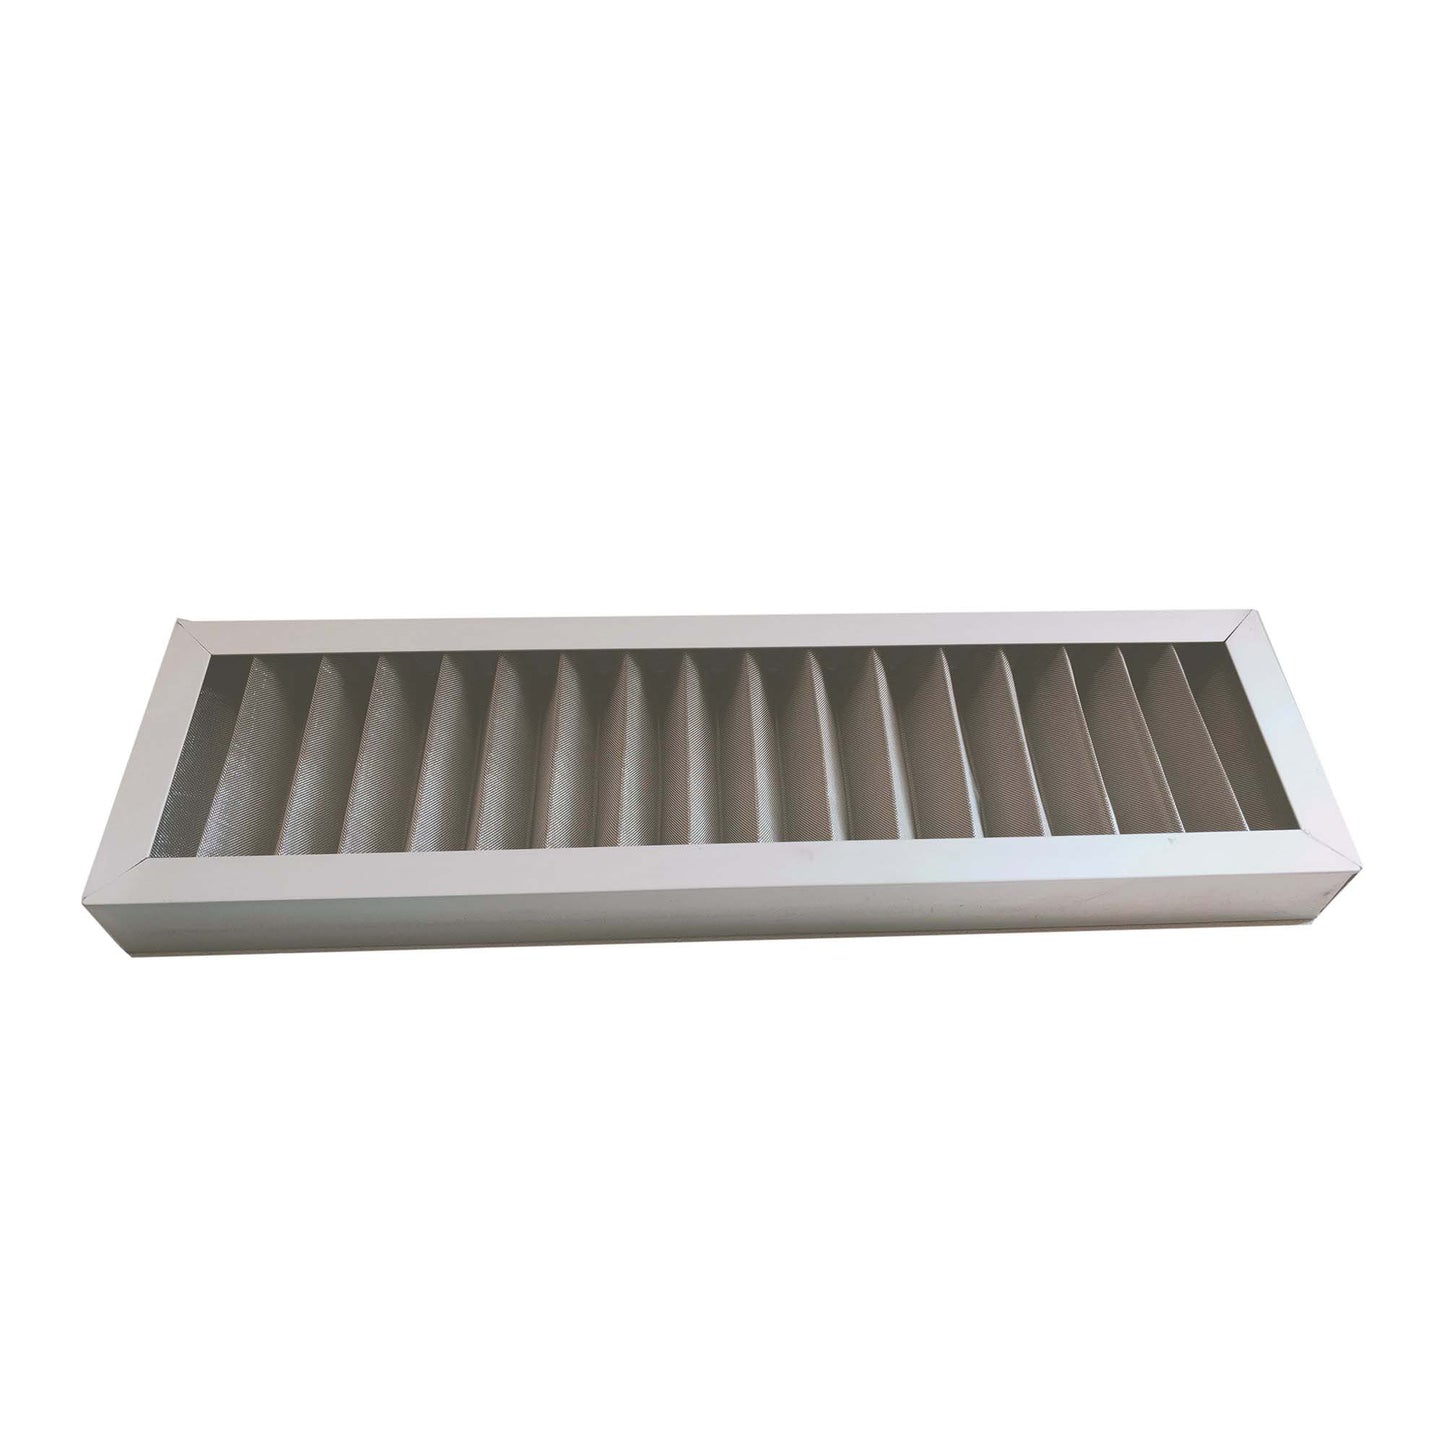 Secondary Stainless Steel Filter for XPOWER LGR Dehumidifiers